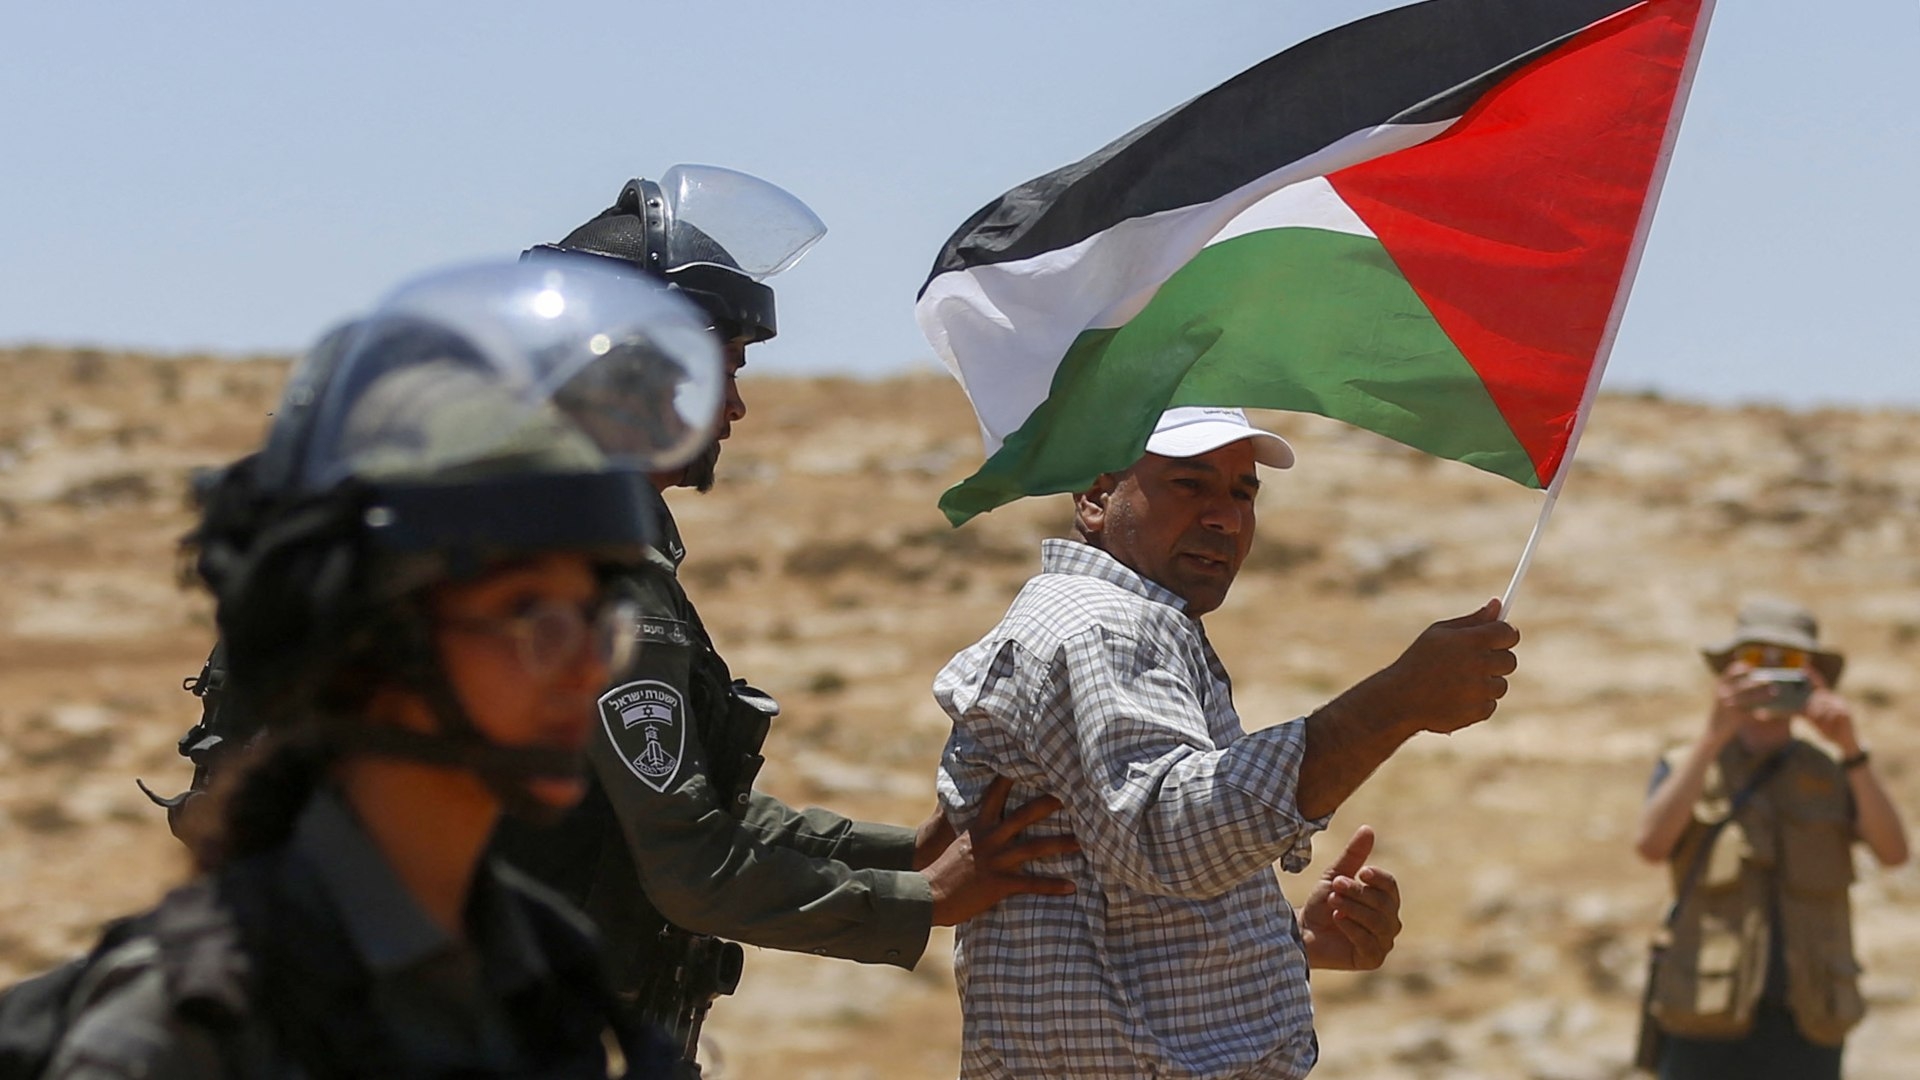 Israeli forces remove a demonstrator during a demonstration on 1 July 2022, in Masafer Yatta area in the Israeli-occupied West Bank.